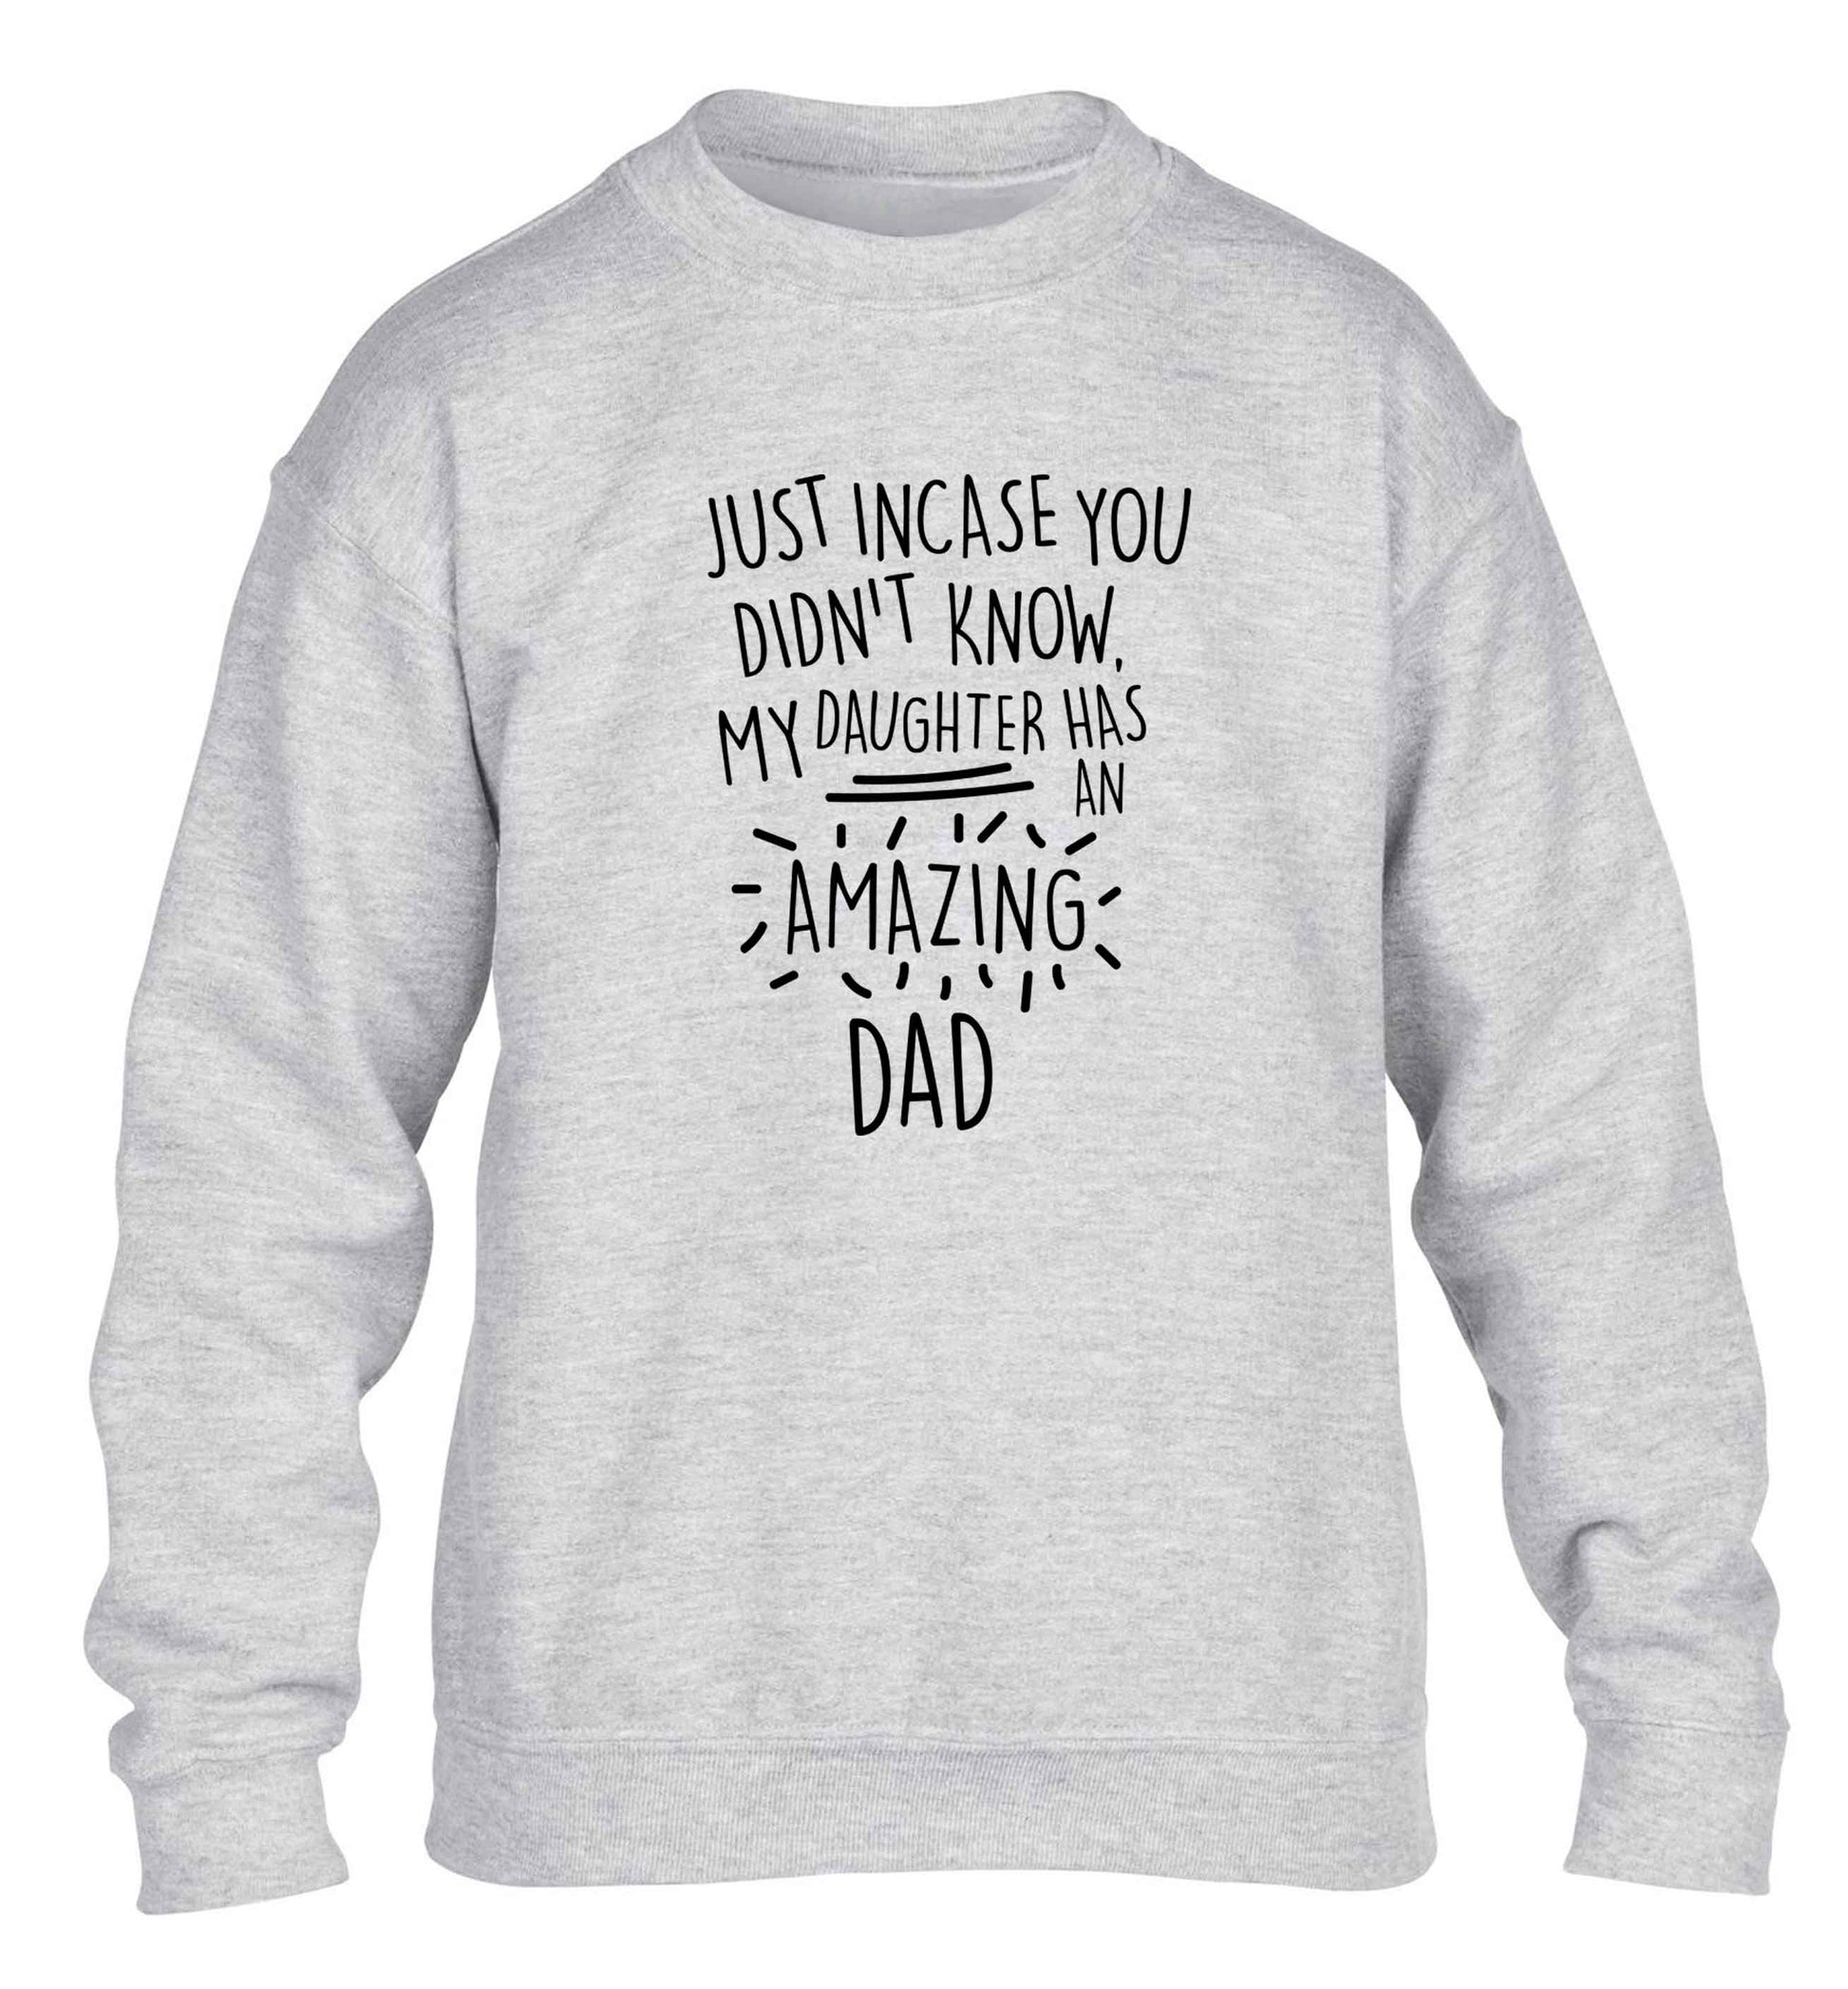 Just incase you didn't know my daughter has an amazing dad children's grey sweater 12-13 Years